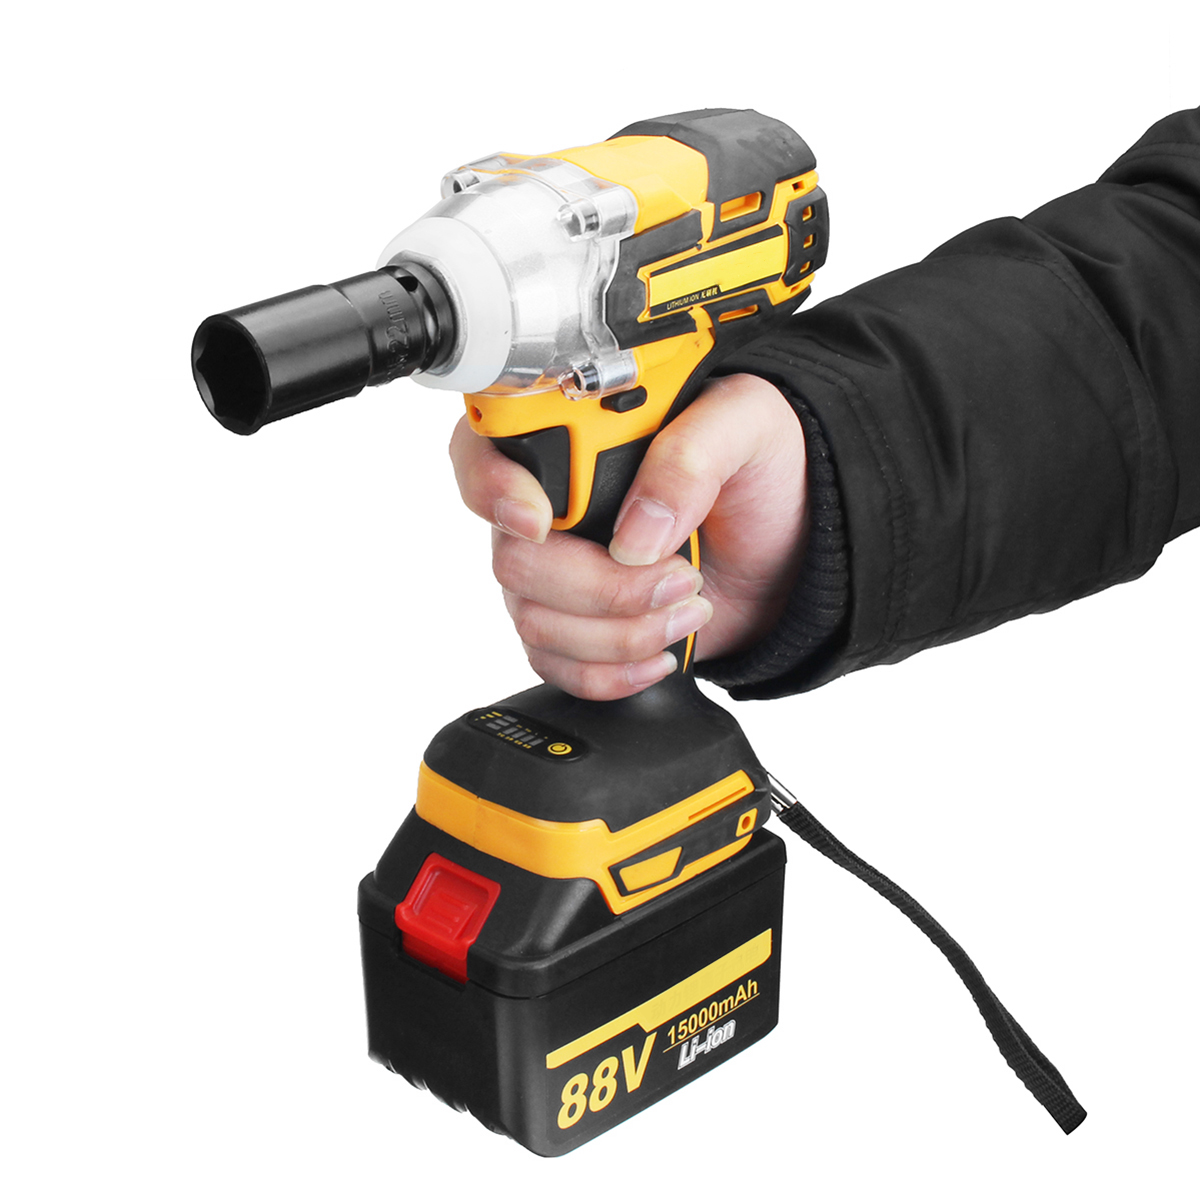 88V-15000mAh-Electric-Wrench-2-Batteries-1-Charger-Brushless-Cordless-Drive-Impact-Wrench-Tools-1282967-4